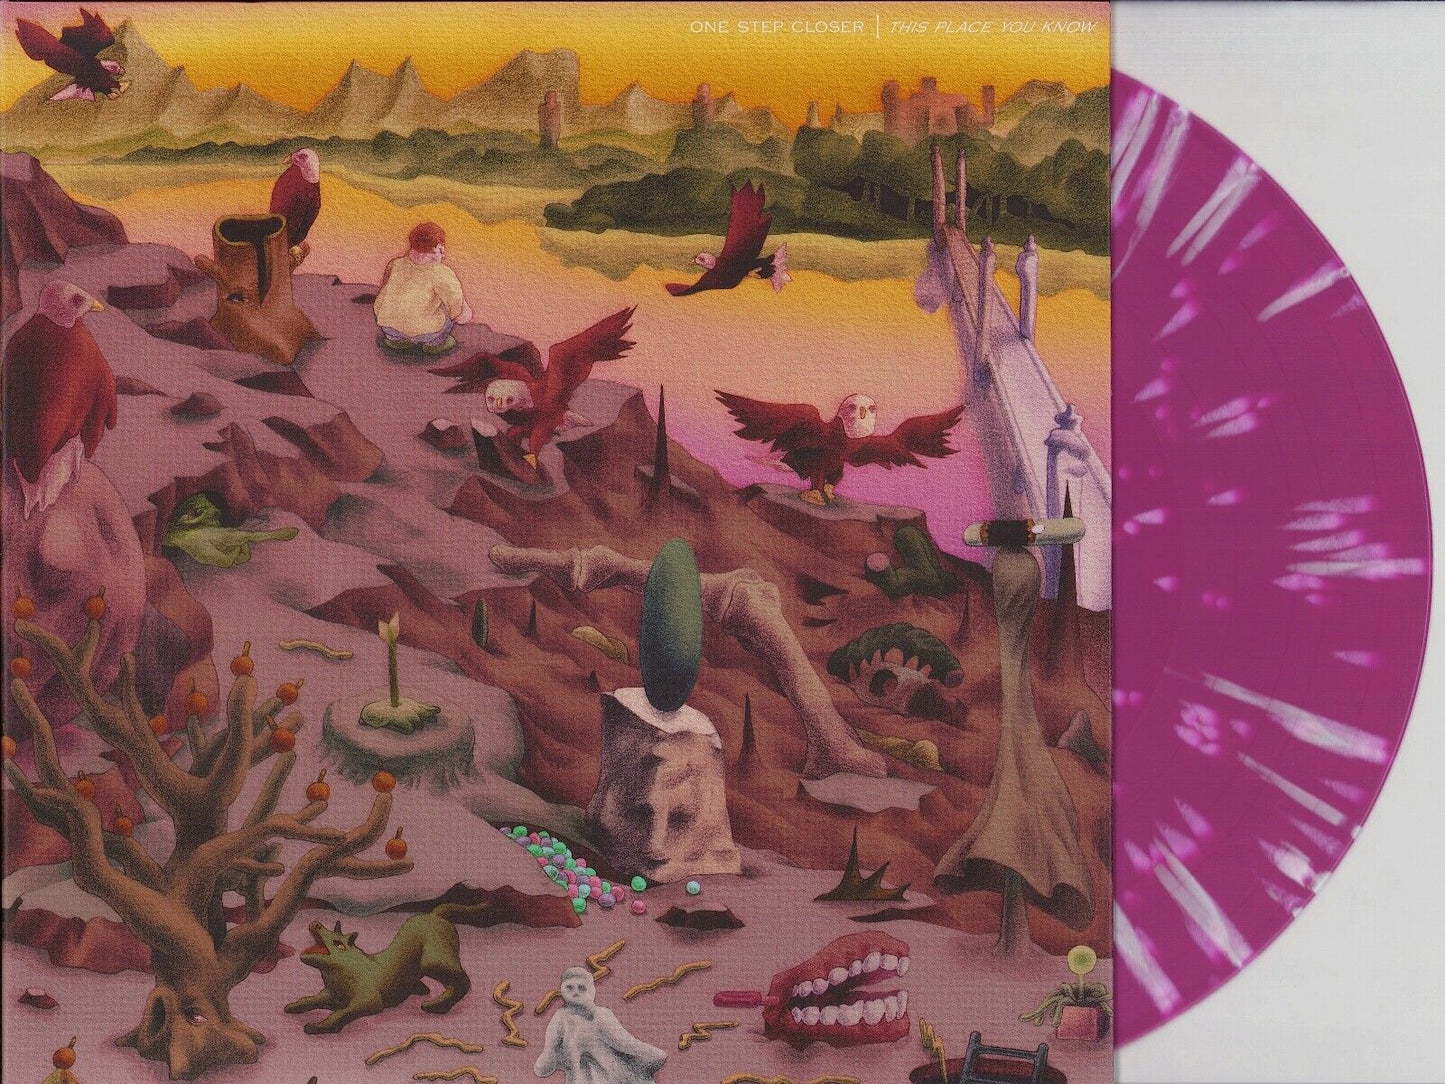 One Step Closer ‎- This Place You Know Purple With White Splatter Vinyl LP Limited Edition